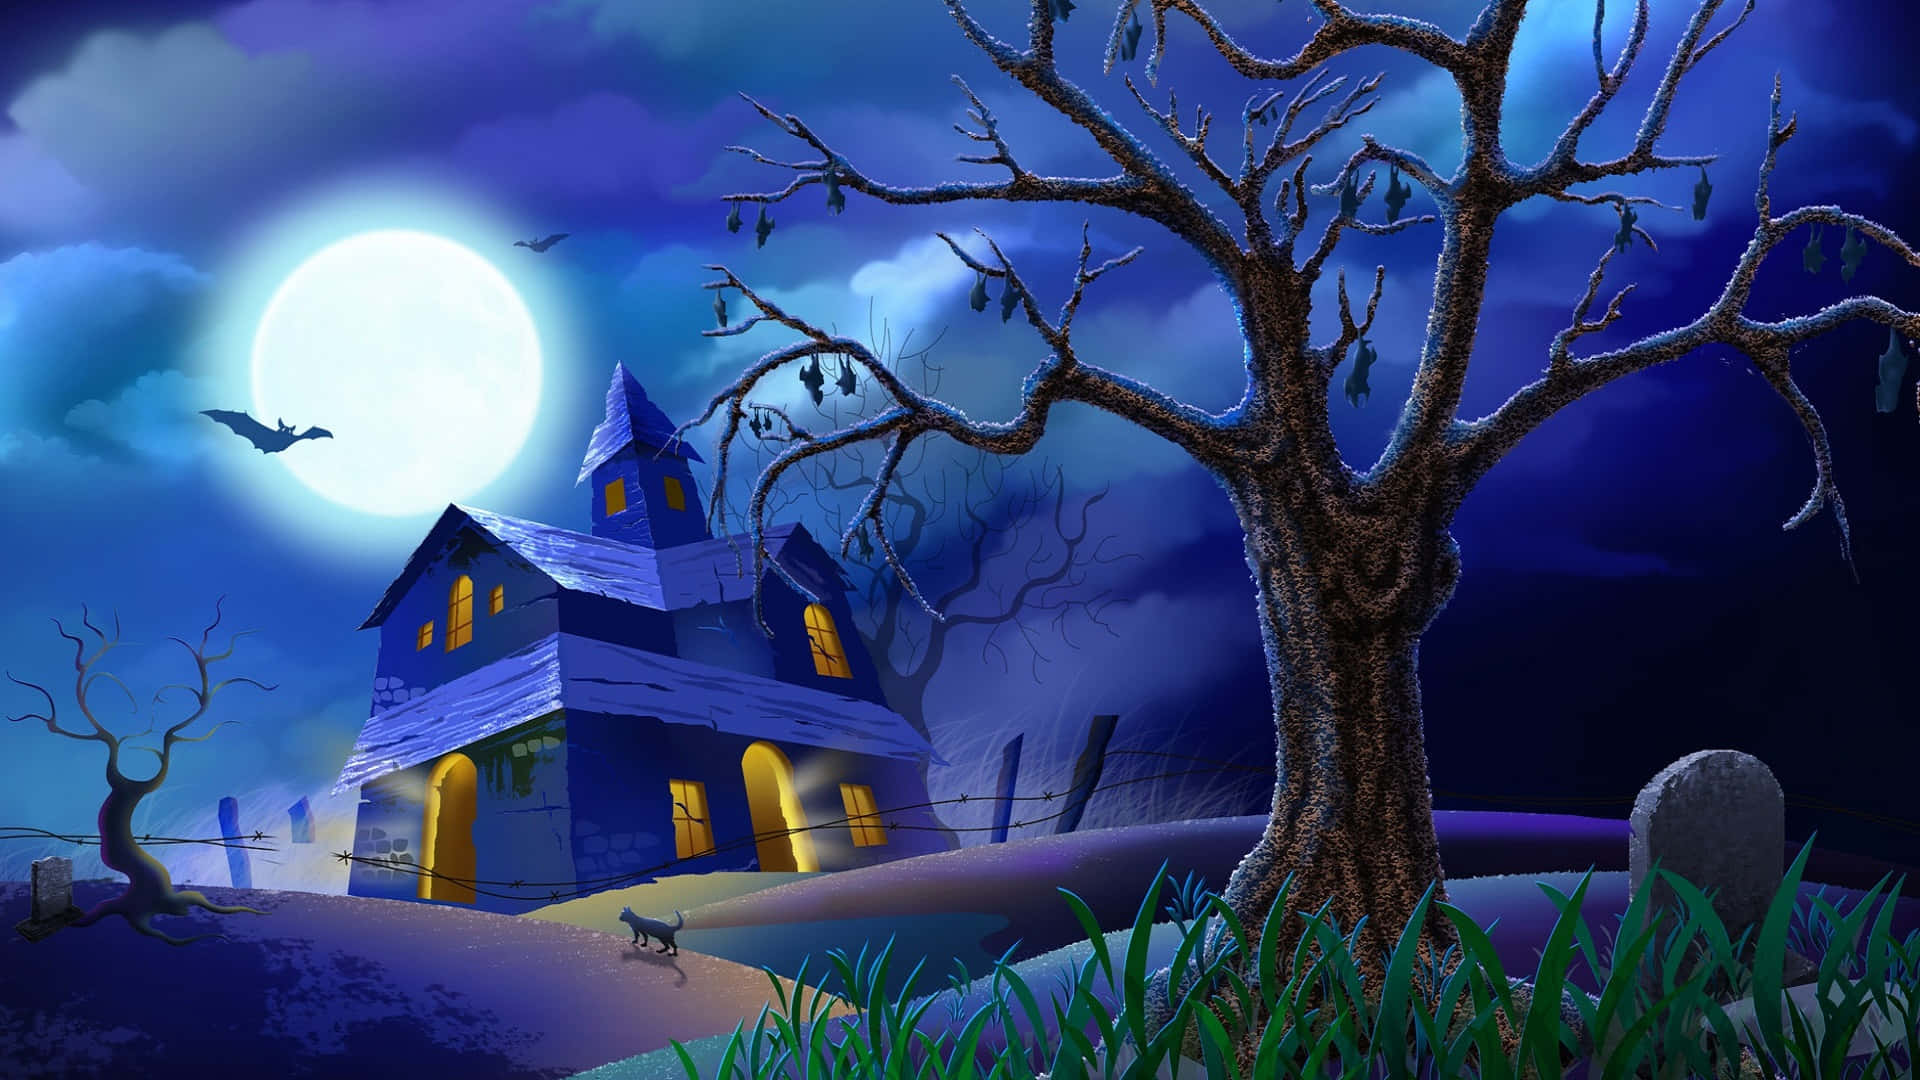 Enjoy The Breezy Night Air Of The Spooky Holiday! Wallpaper